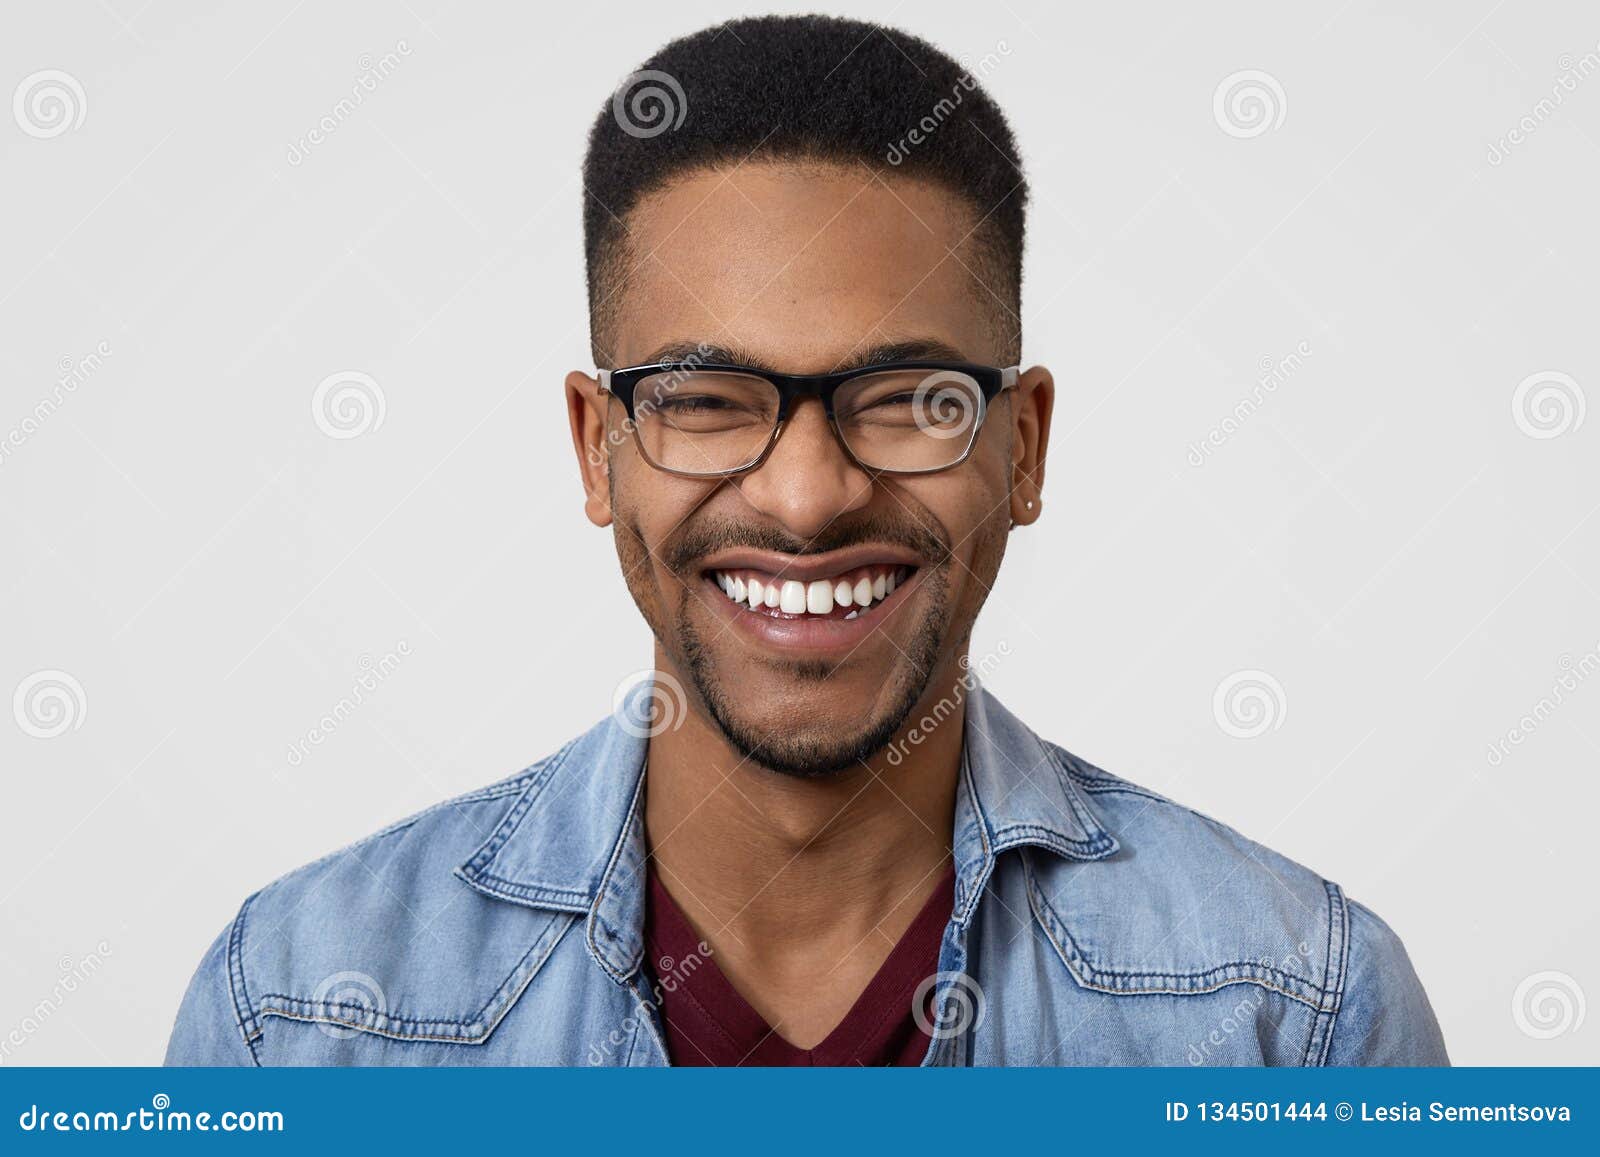 Close Up Shot of Dark Skinned Guy with Broad Toothy Smile, White Teeth,  Wears Denim Shirt, Spectacles, Has Short Curly Hair, Stock Photo - Image of  confidence, closeup: 134501444